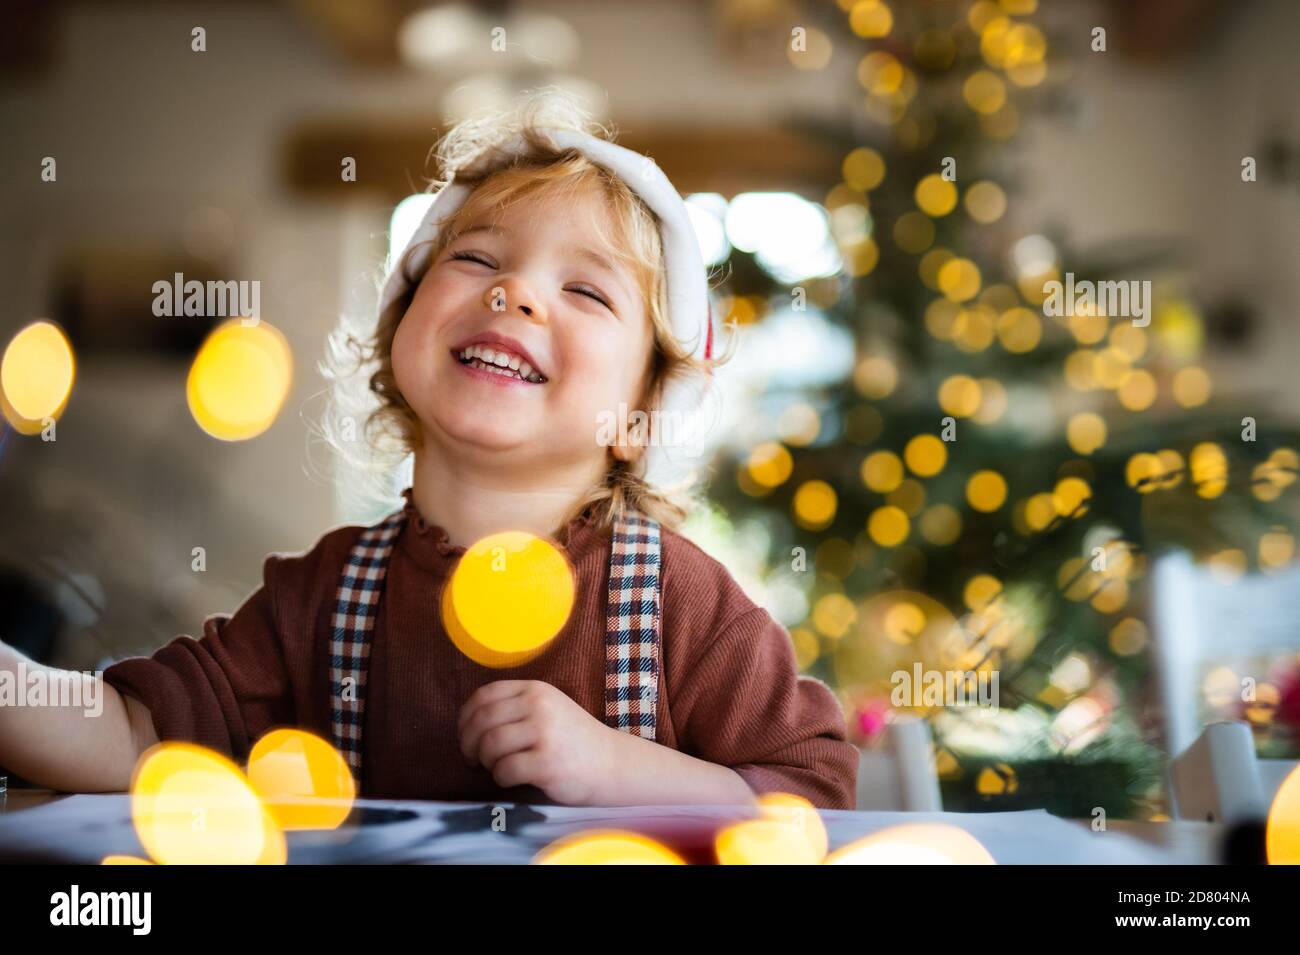 Portrait of small girl indoors at home at Christmas, laughing. Stock Photo